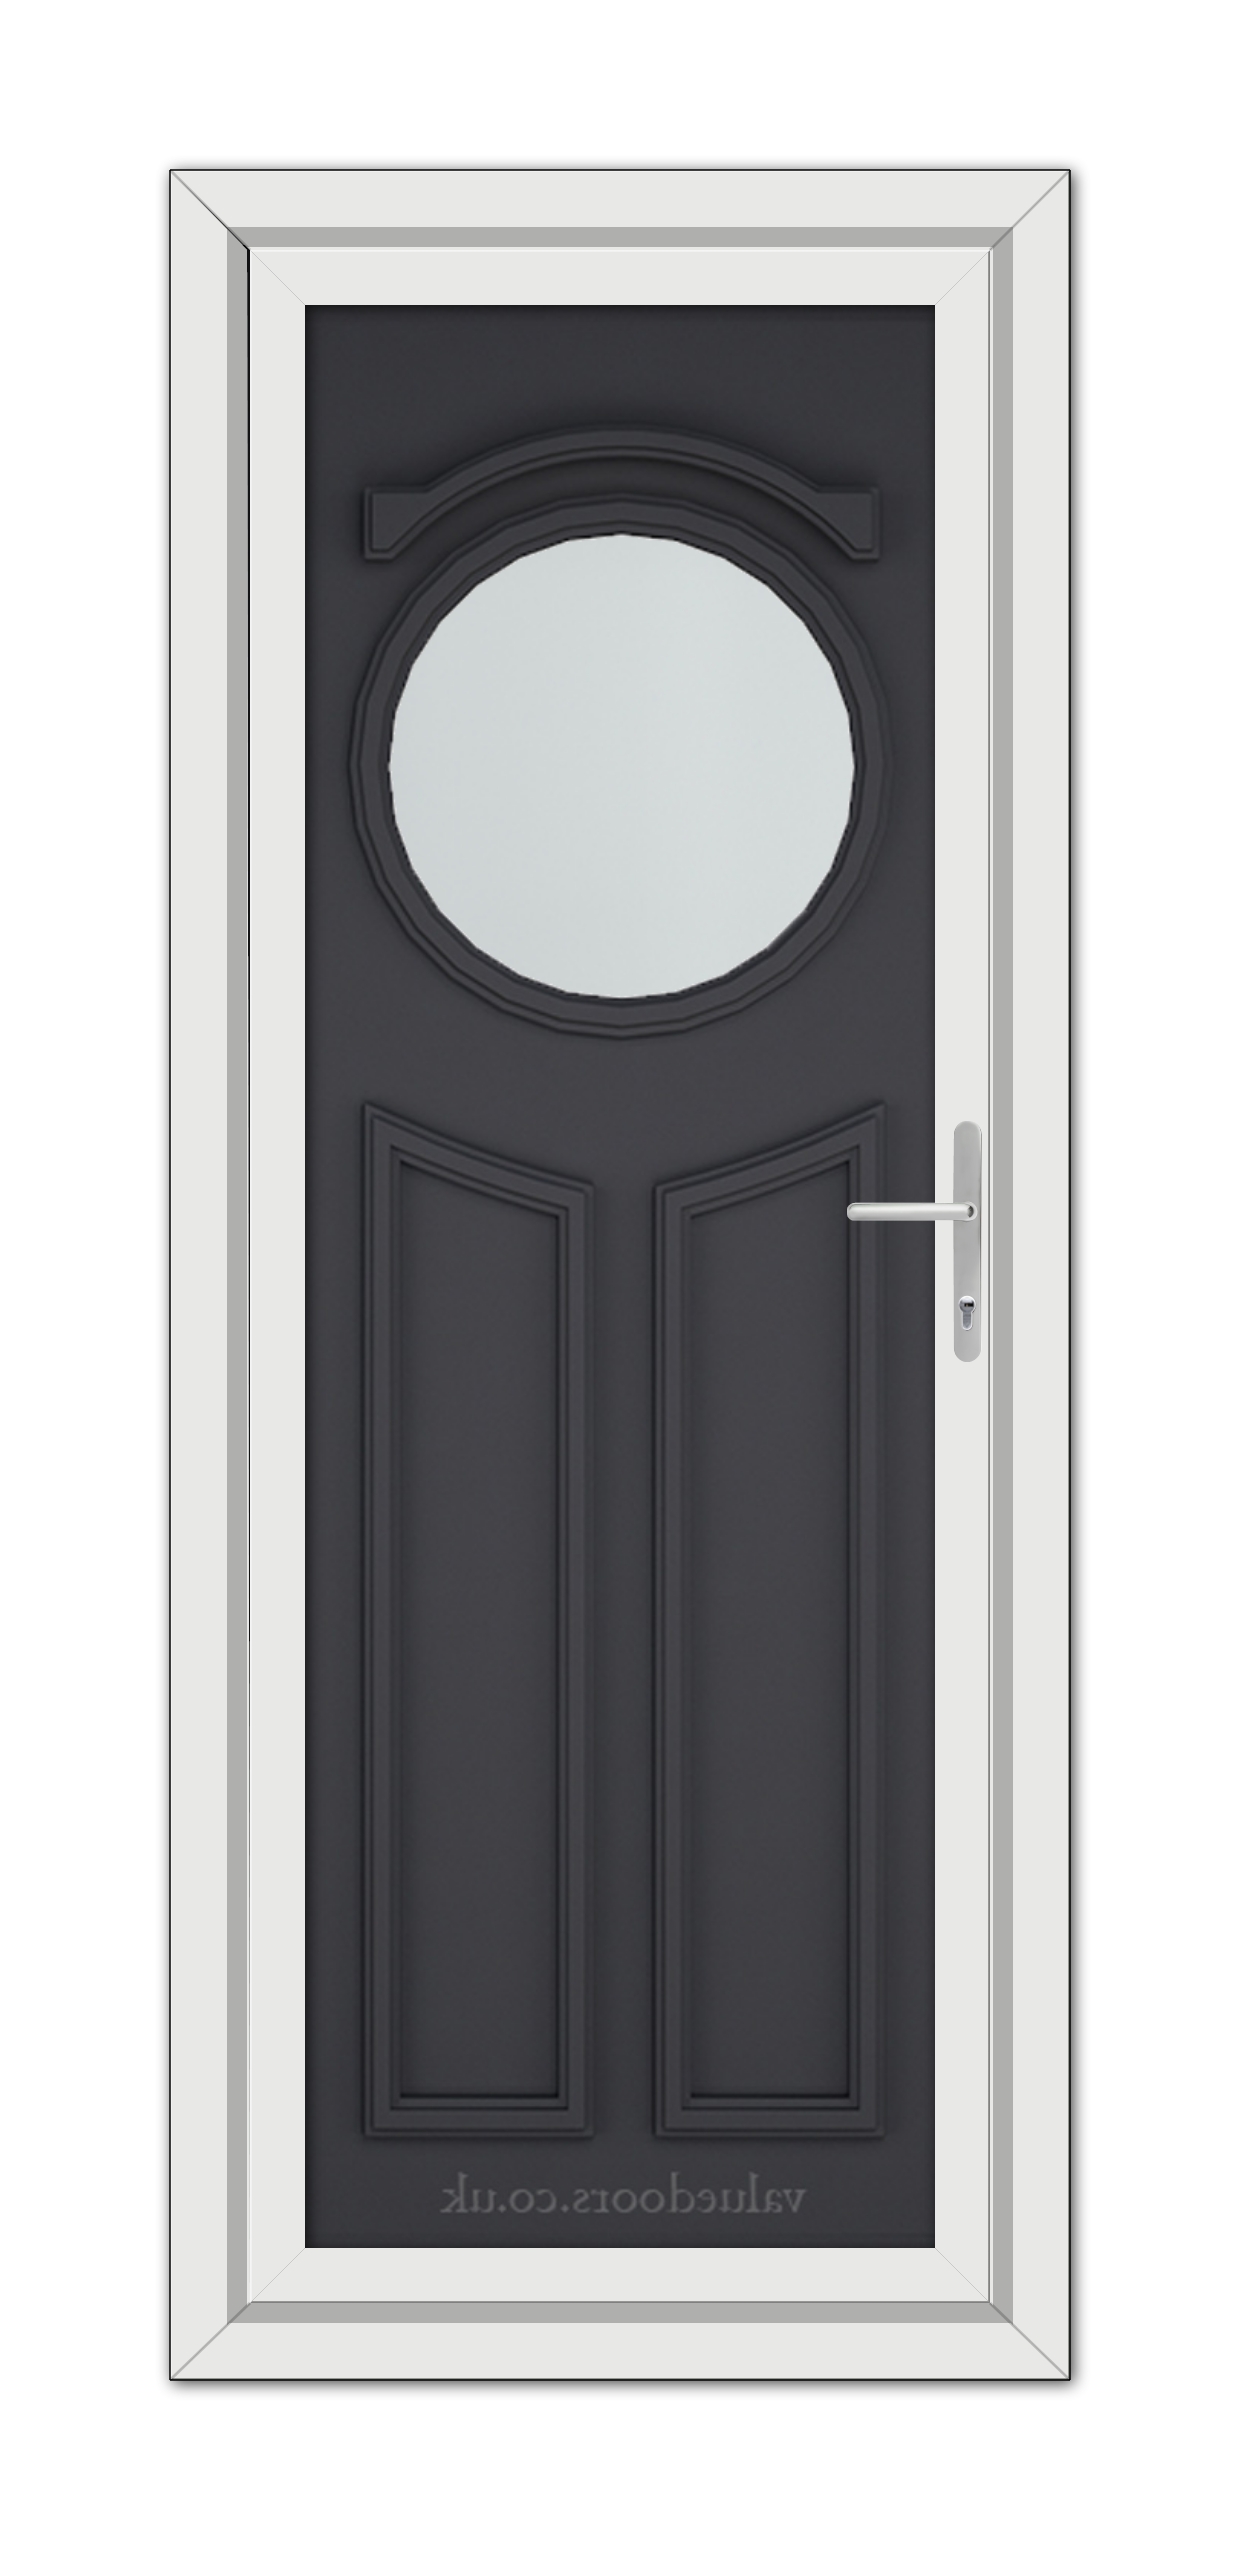 A modern Grey Blenheim uPVC Door with an oval-shaped window, set within a white frame, and equipped with a metallic handle on the right side.